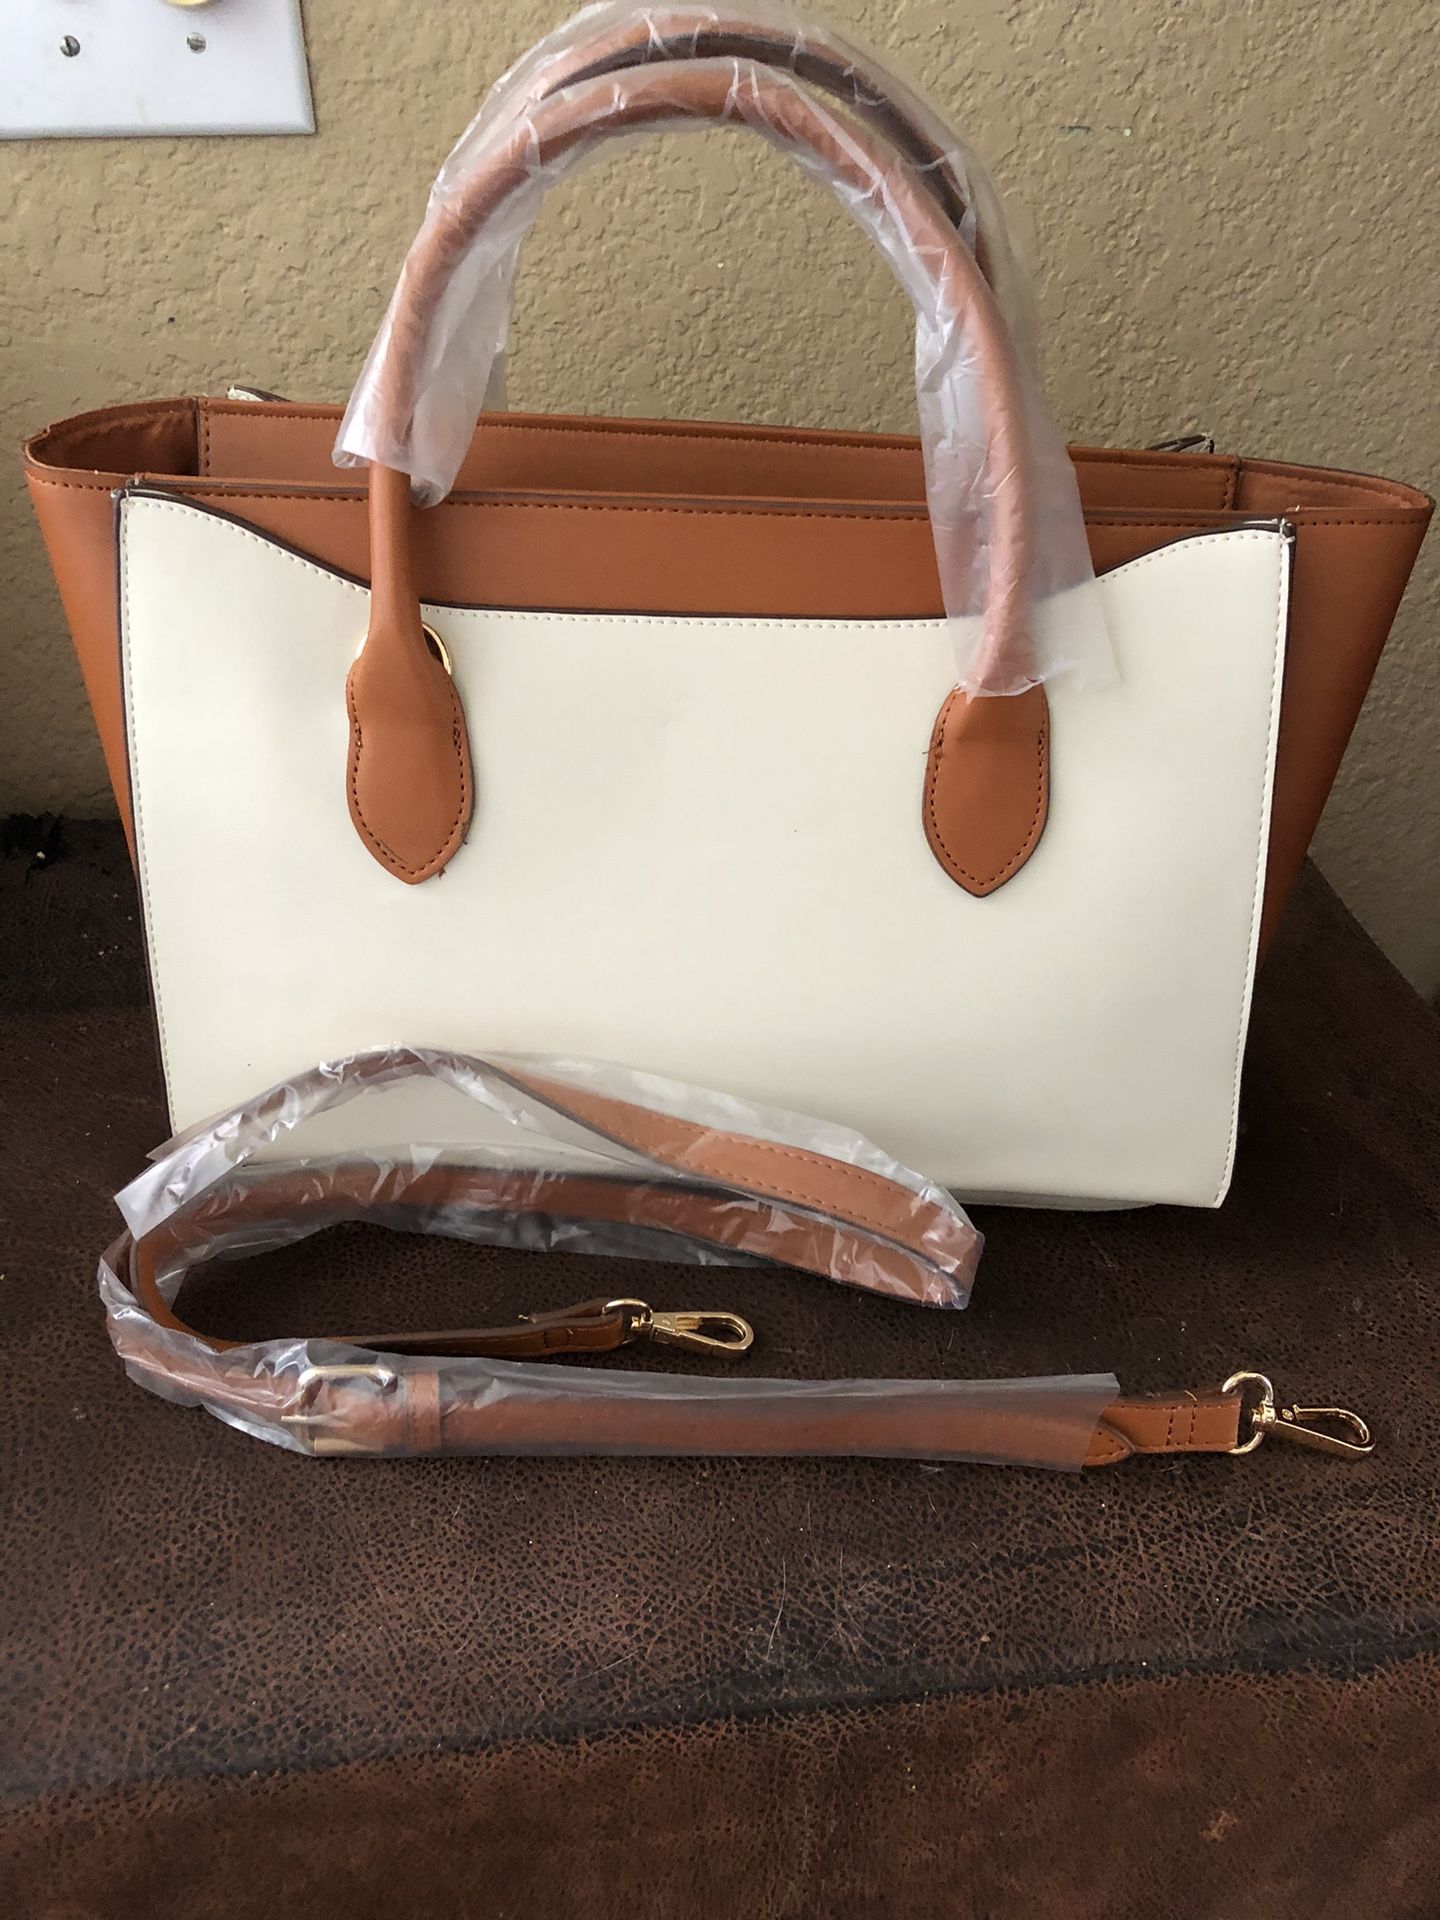 Loulu Hand Bag With Strap